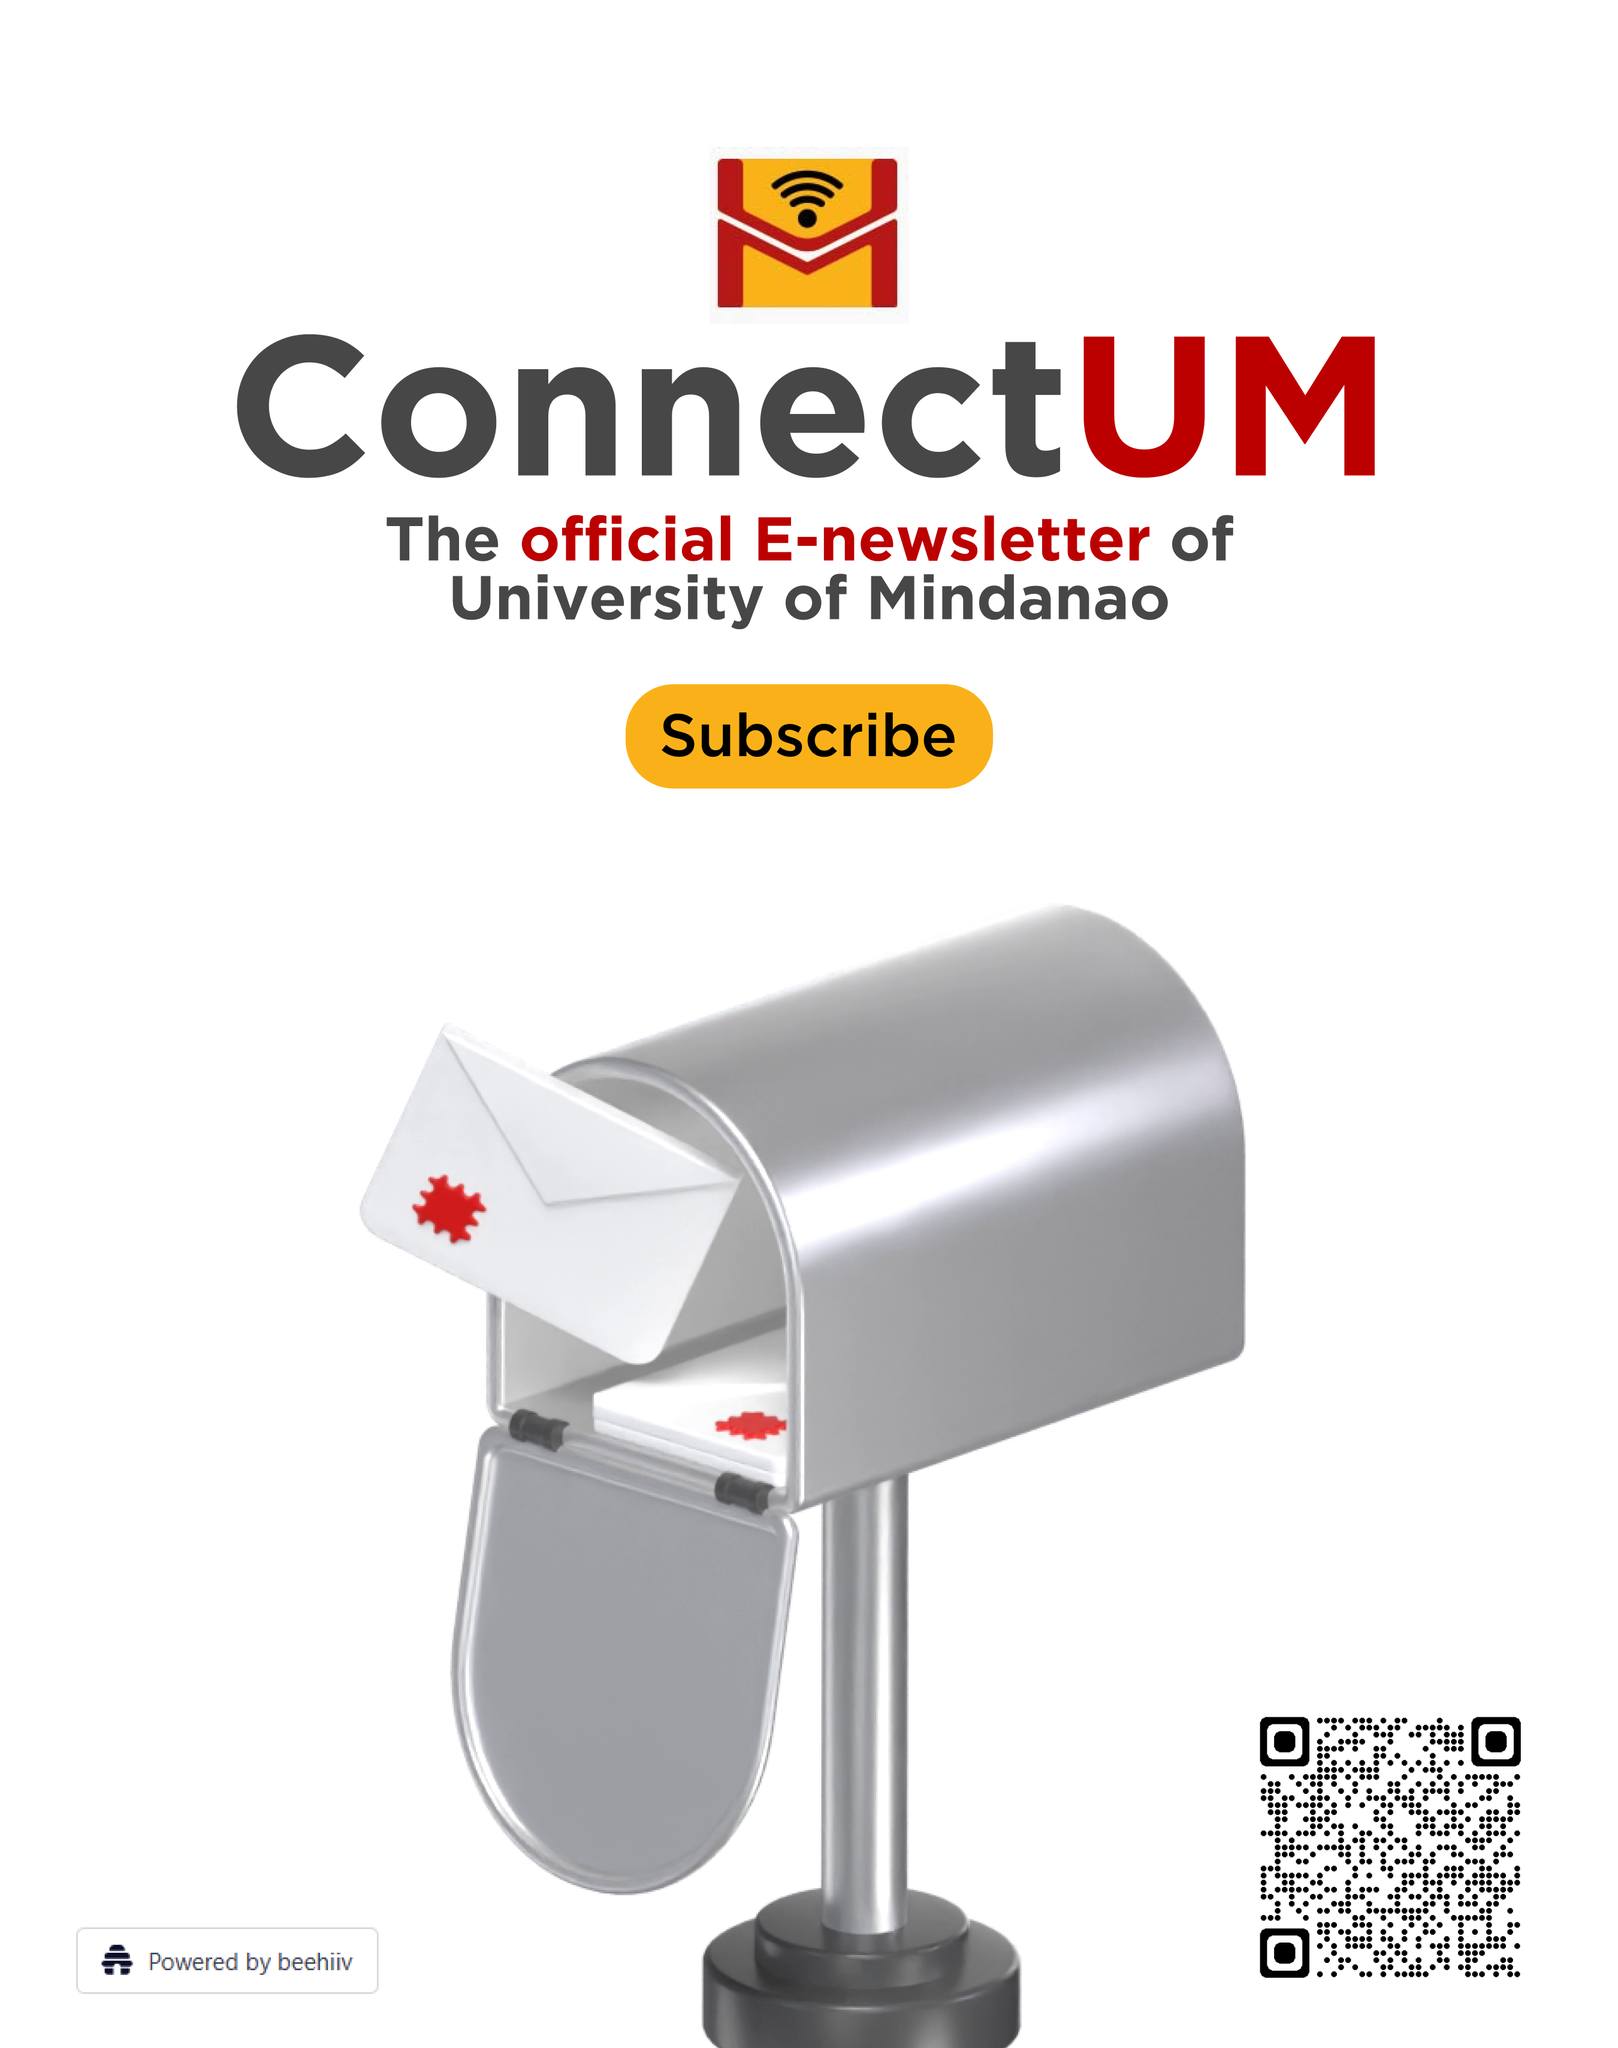 Connect with UM through ConnectUM: The Official e-Newsletter!